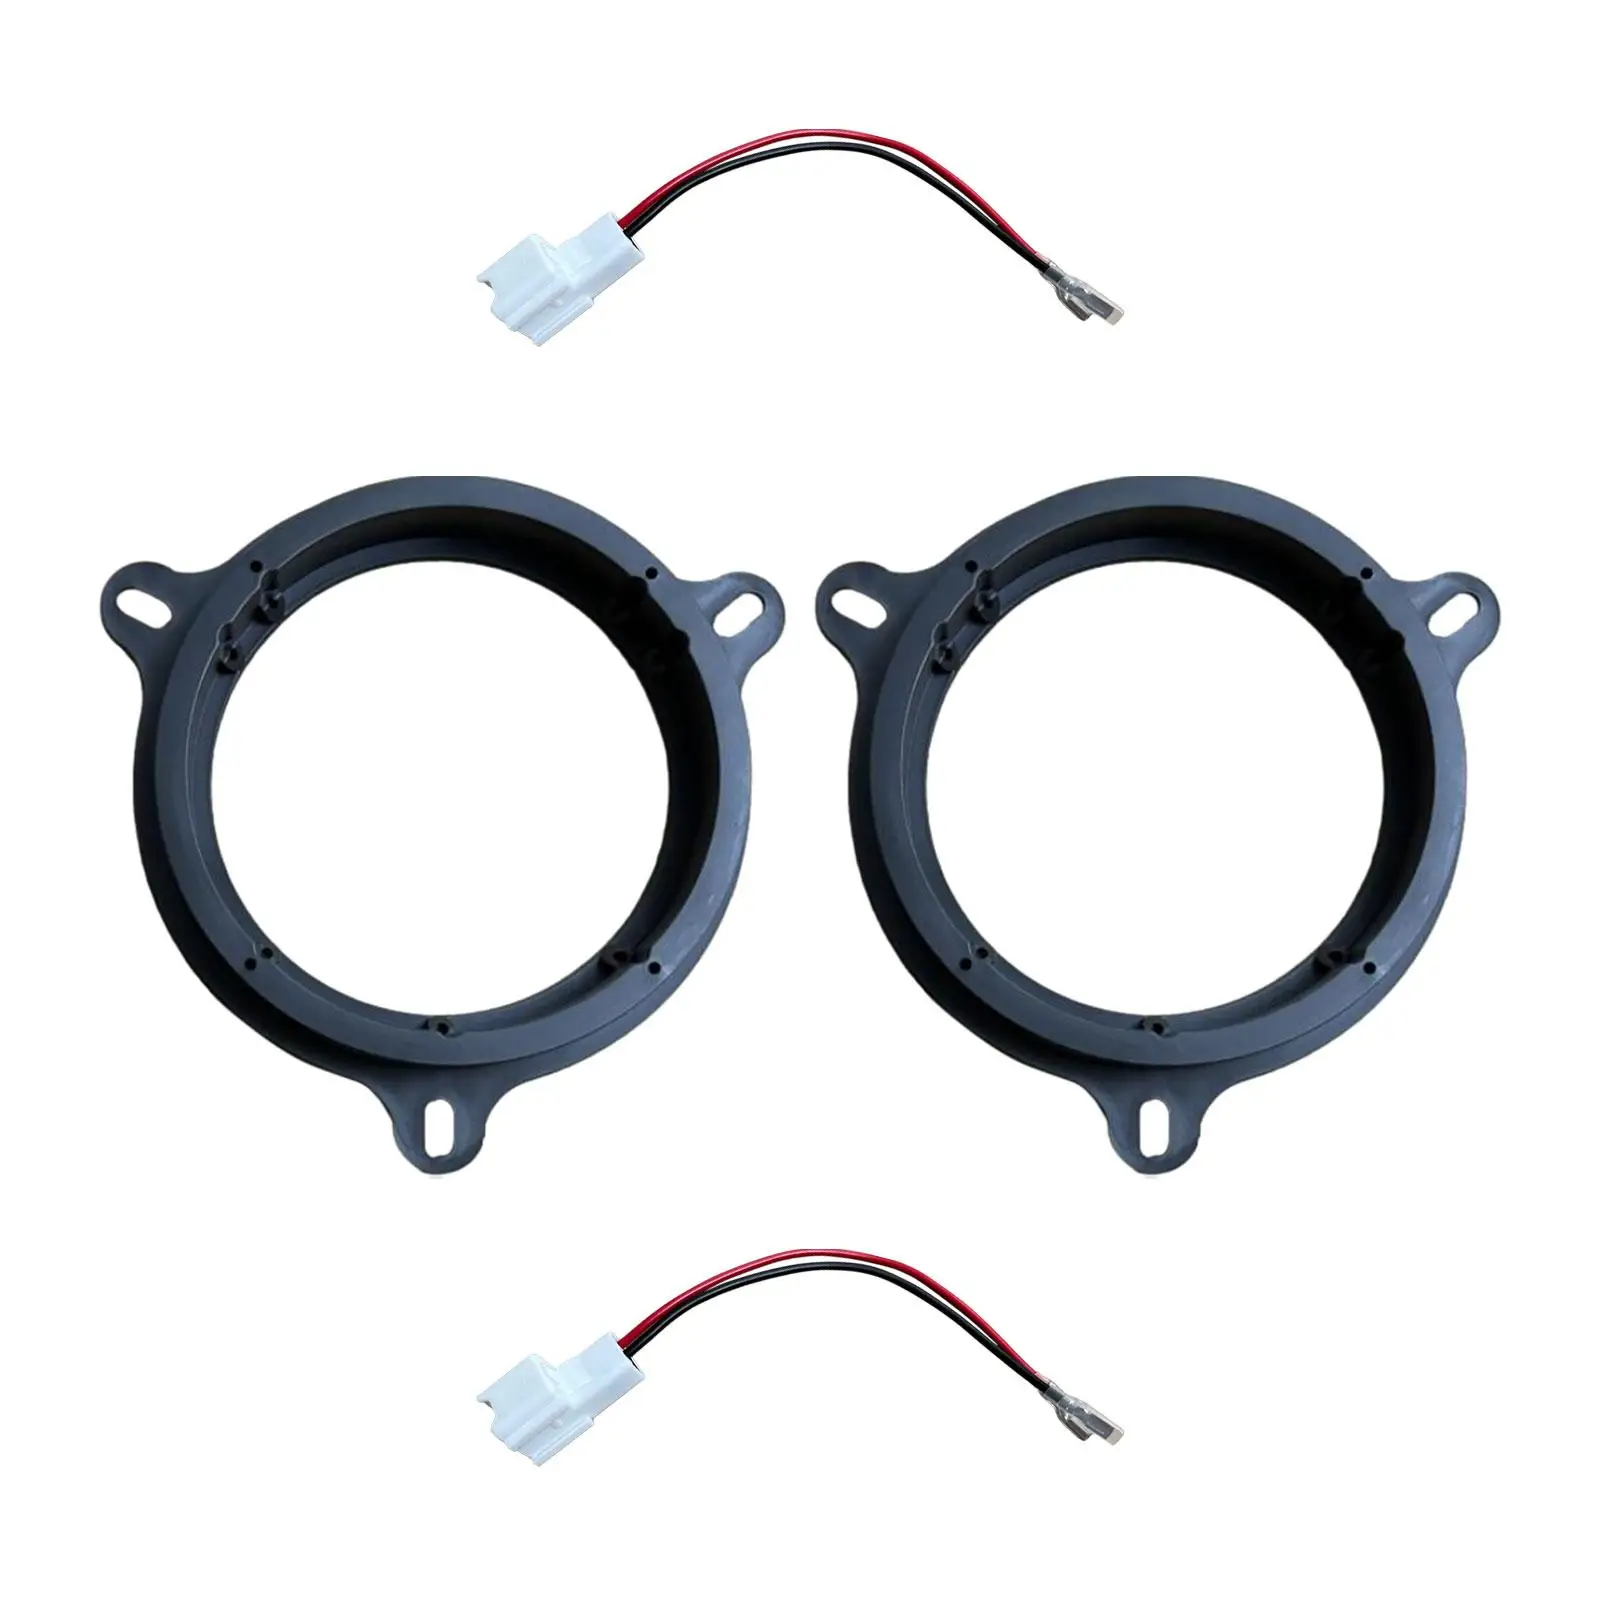 Wiring Harness Set Shims Mounting Vehicles Gasket Car Speaker Spacer Multi Functional Universal Adapter Accessories